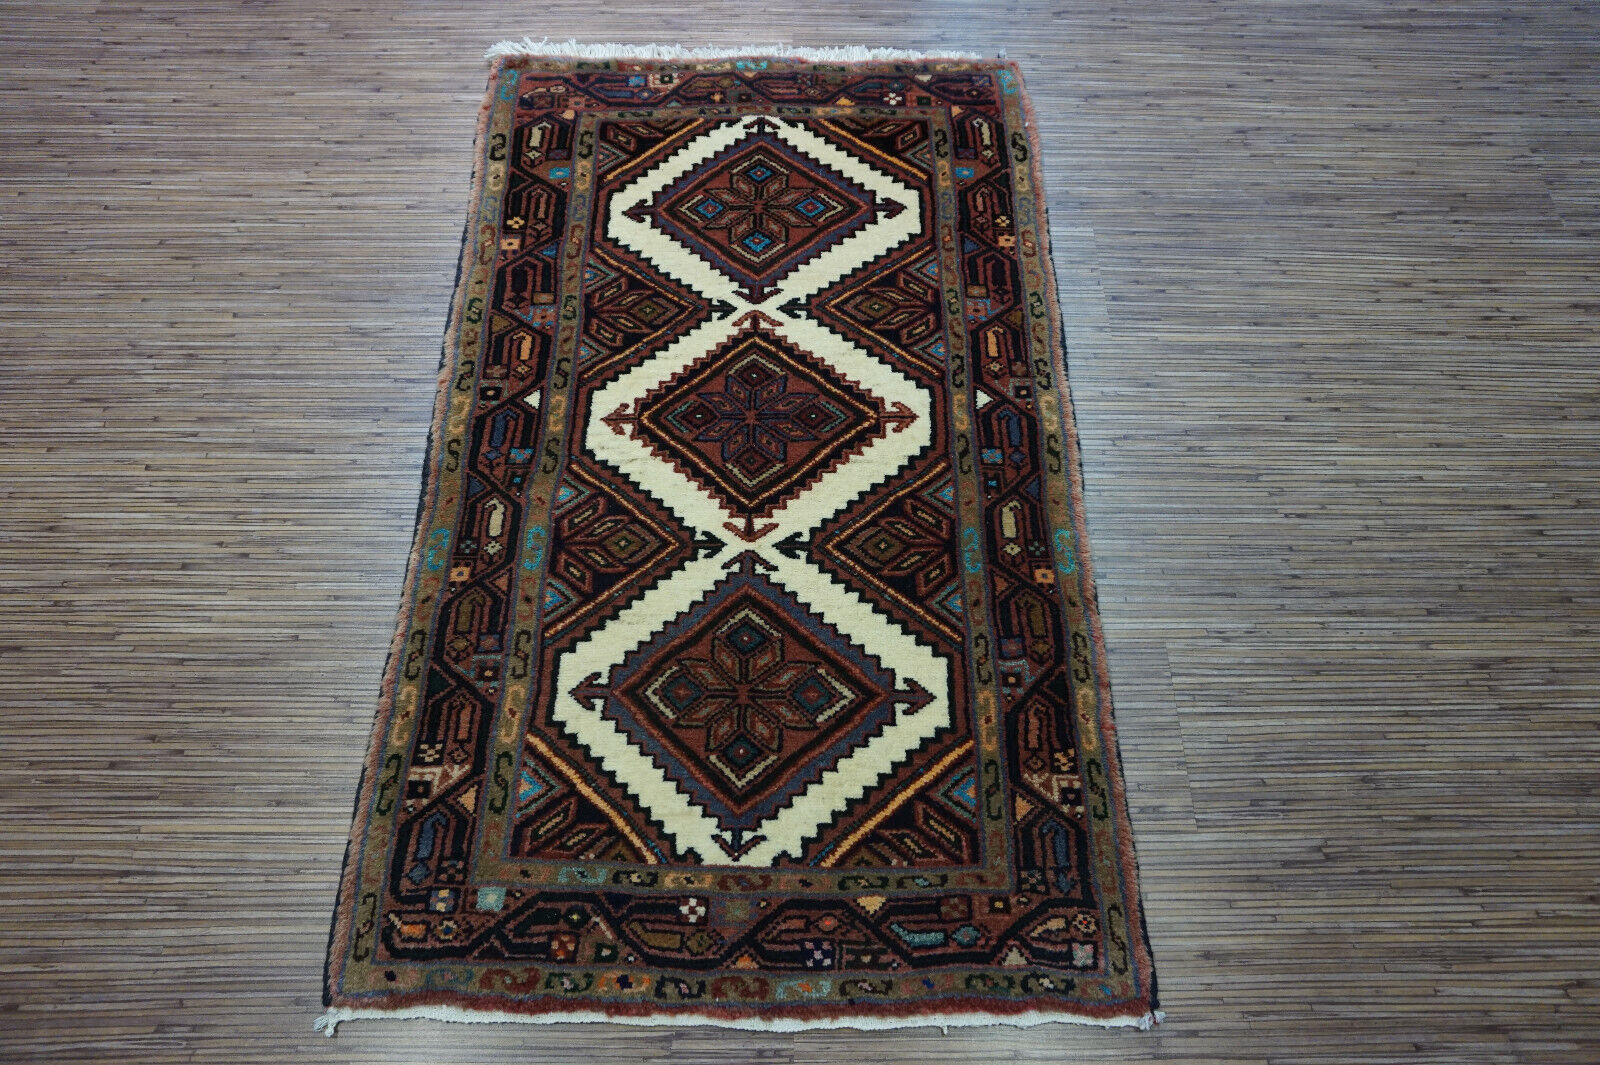 Craftsmanship showcased in the soft and durable wool material of the Persian Style Rug